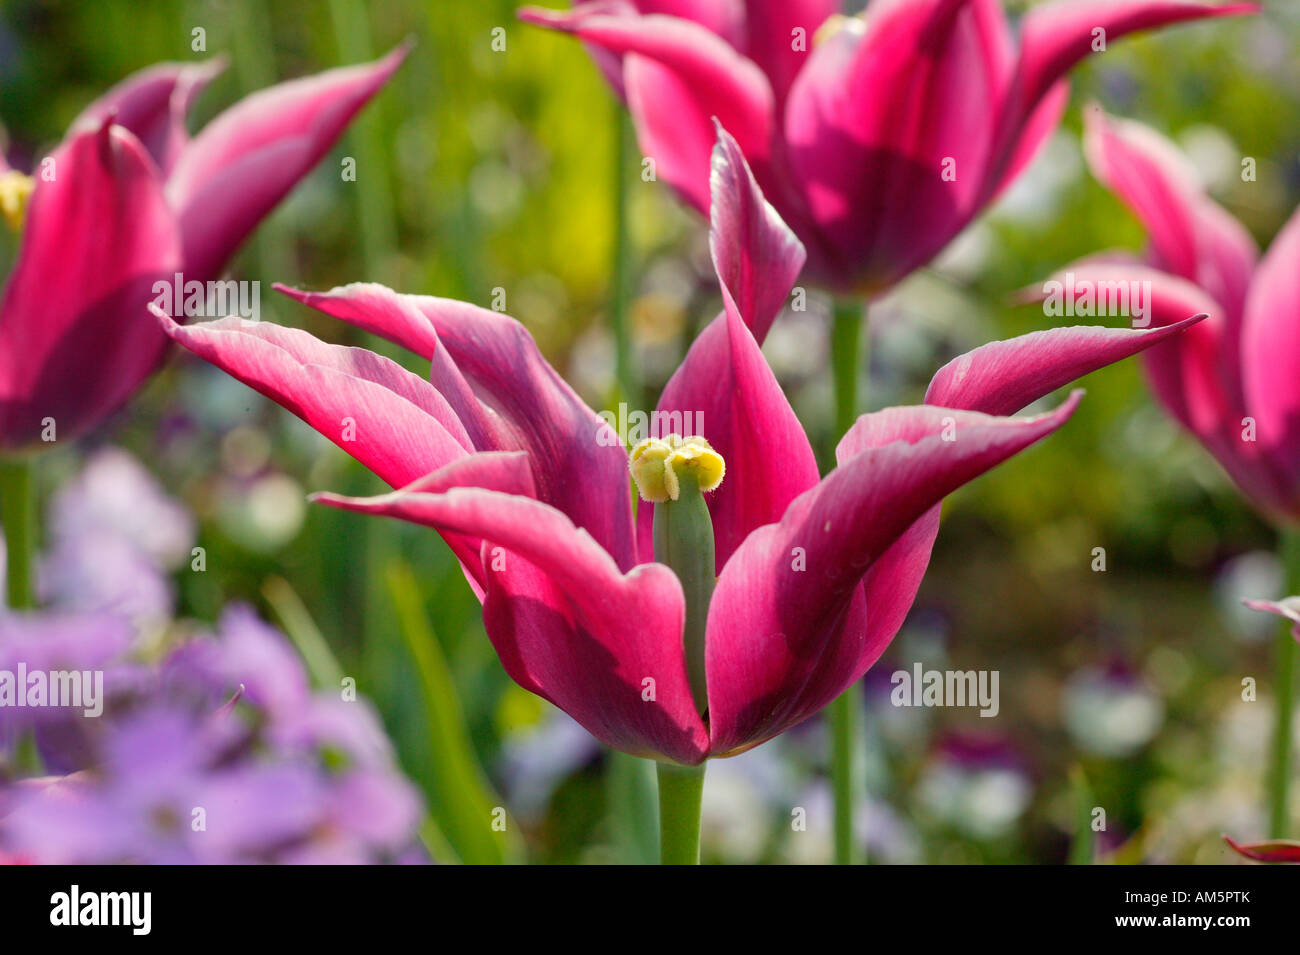 Lily flowering tulips Stock Photo